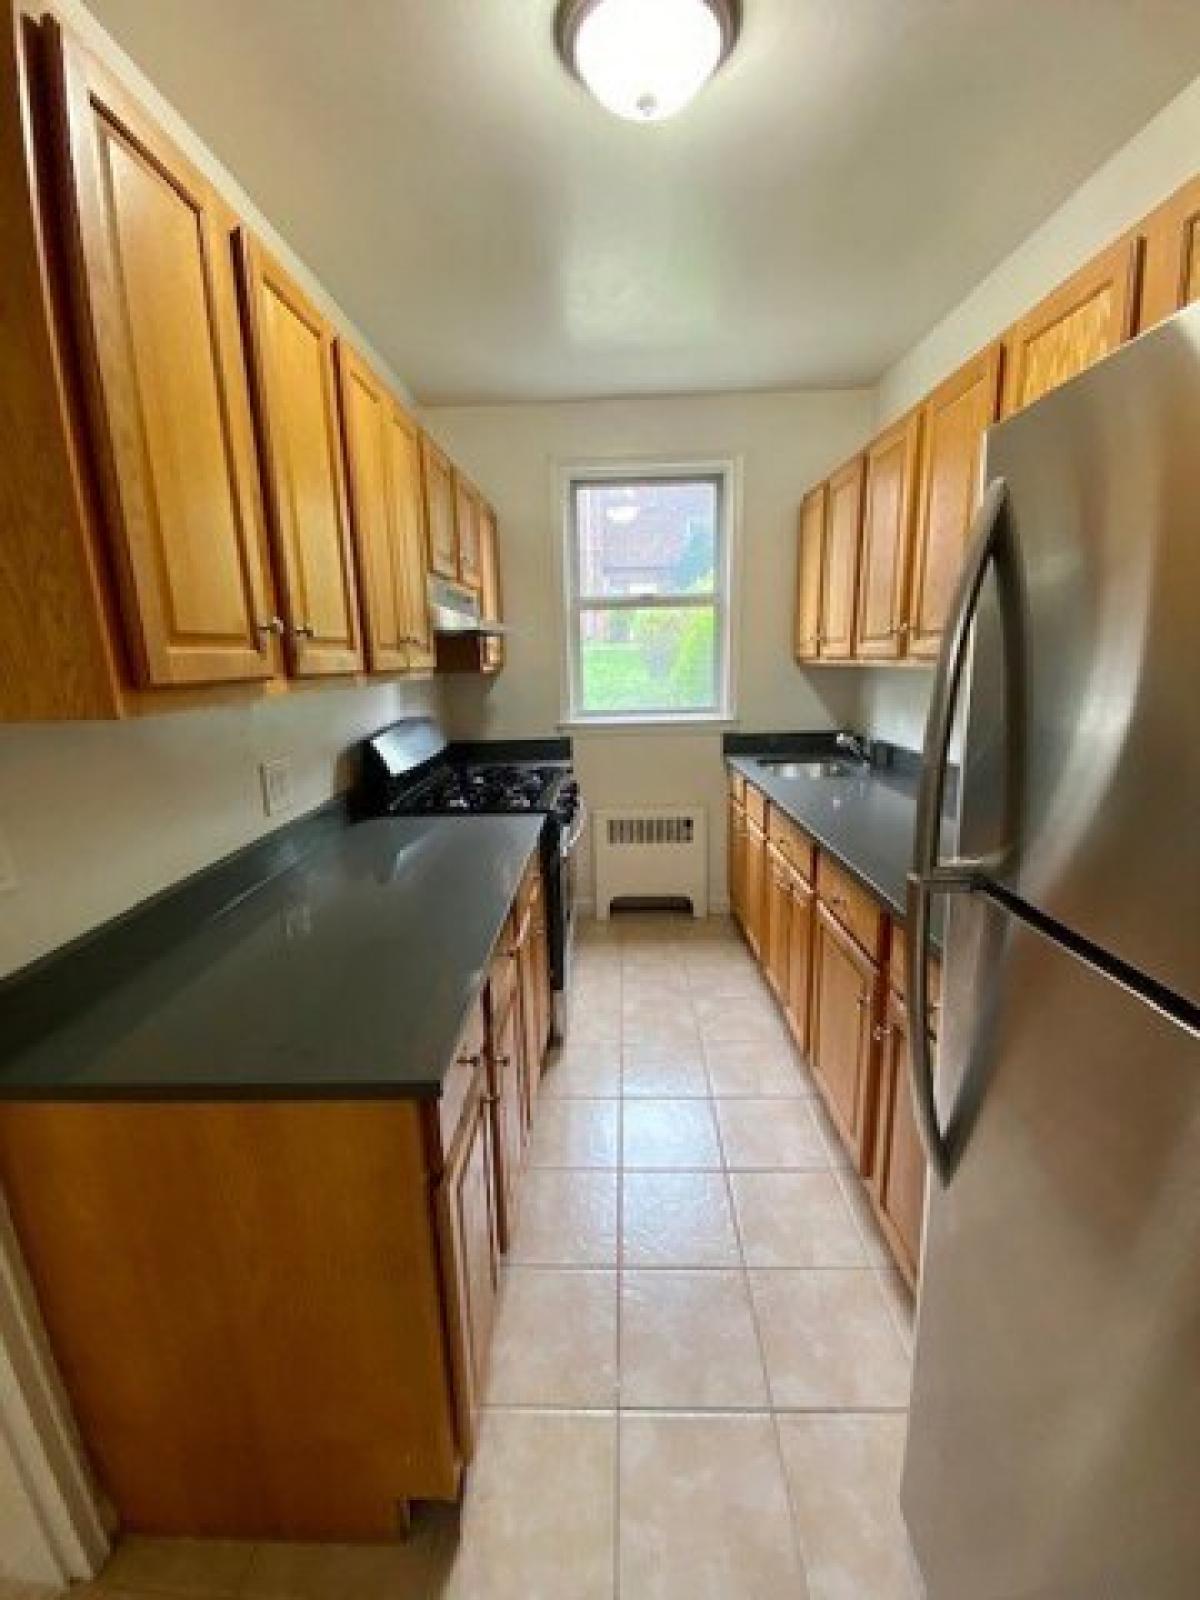 Picture of Home For Rent in Dobbs Ferry, New York, United States